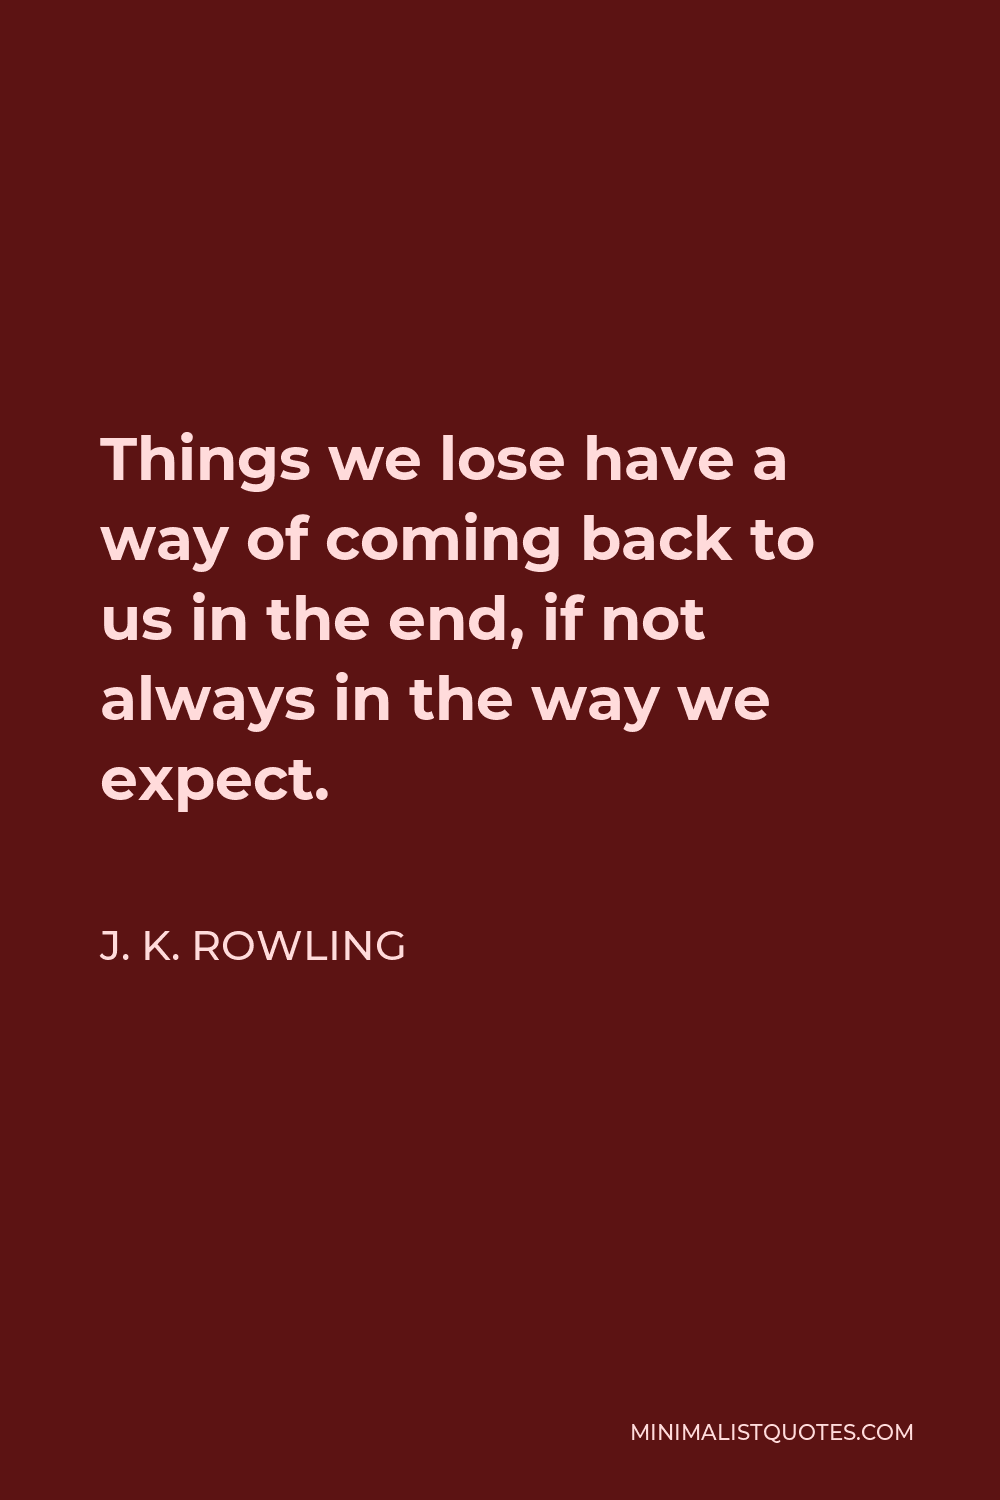 J. K. Rowling Quote - Things we lose have a way of coming back to us in the end, if not always in the way we expect.